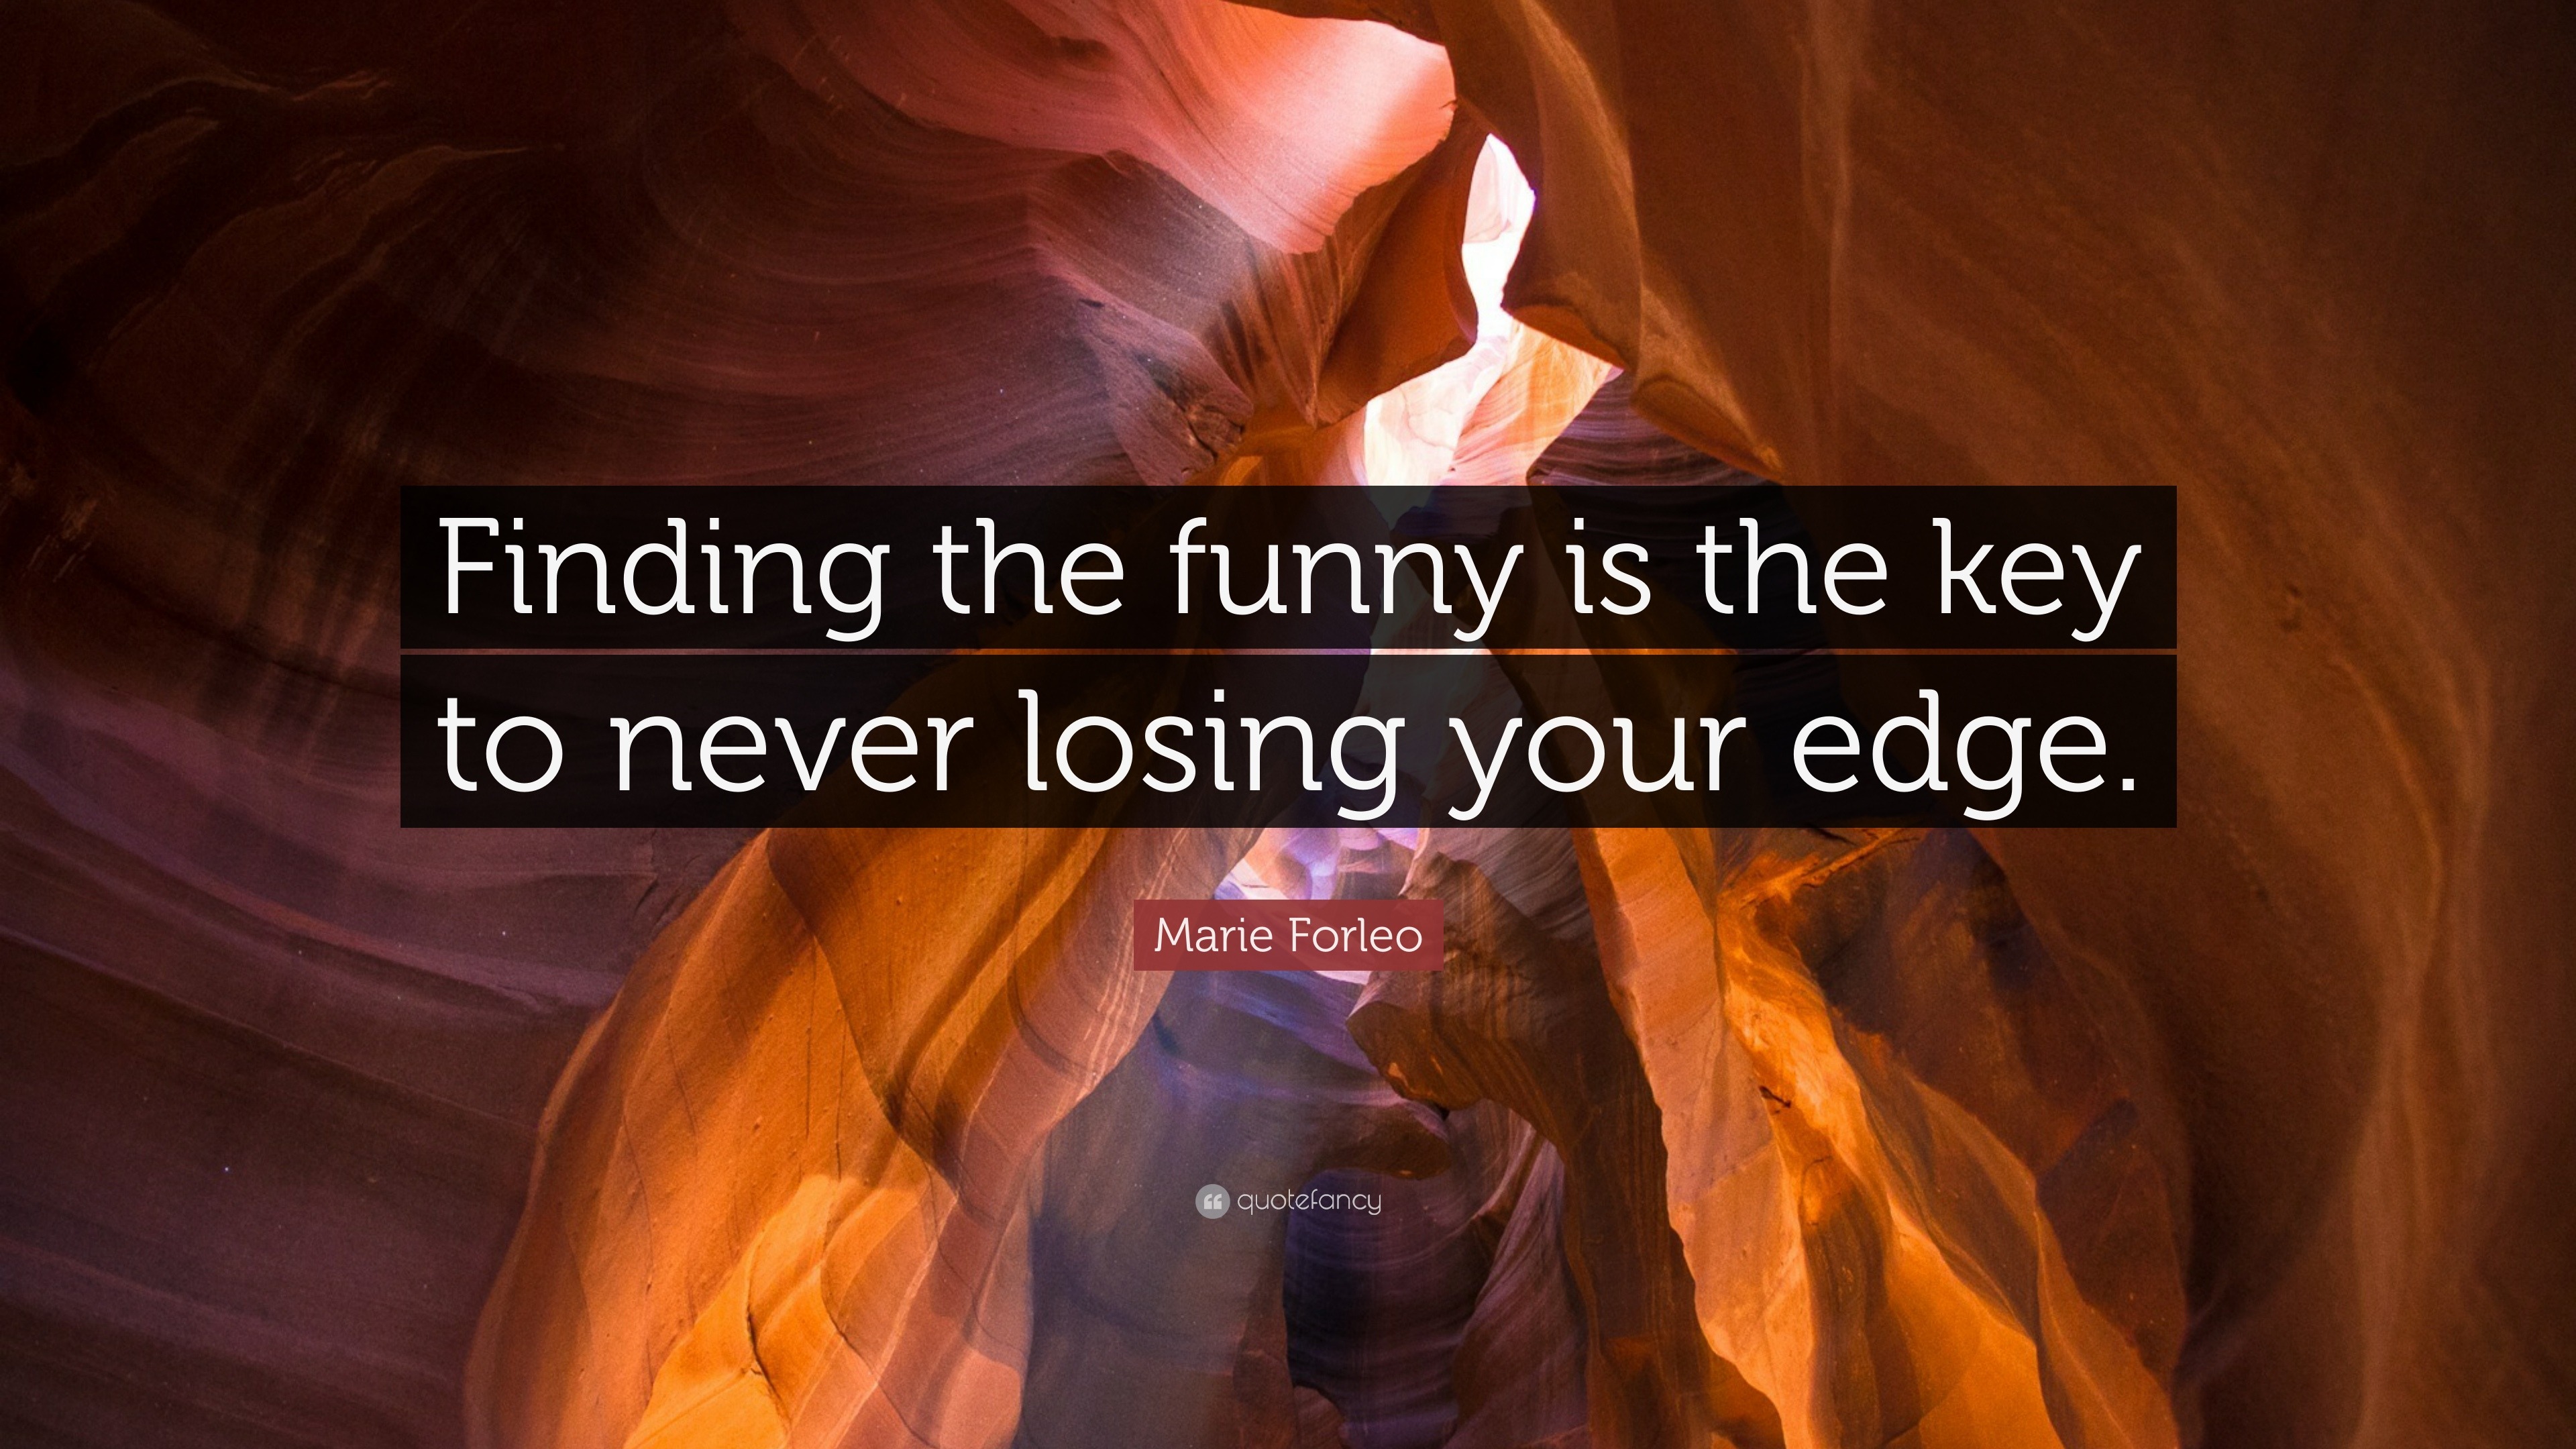 Marie Forleo Quote: “Finding the funny is the key to never losing your  edge.”